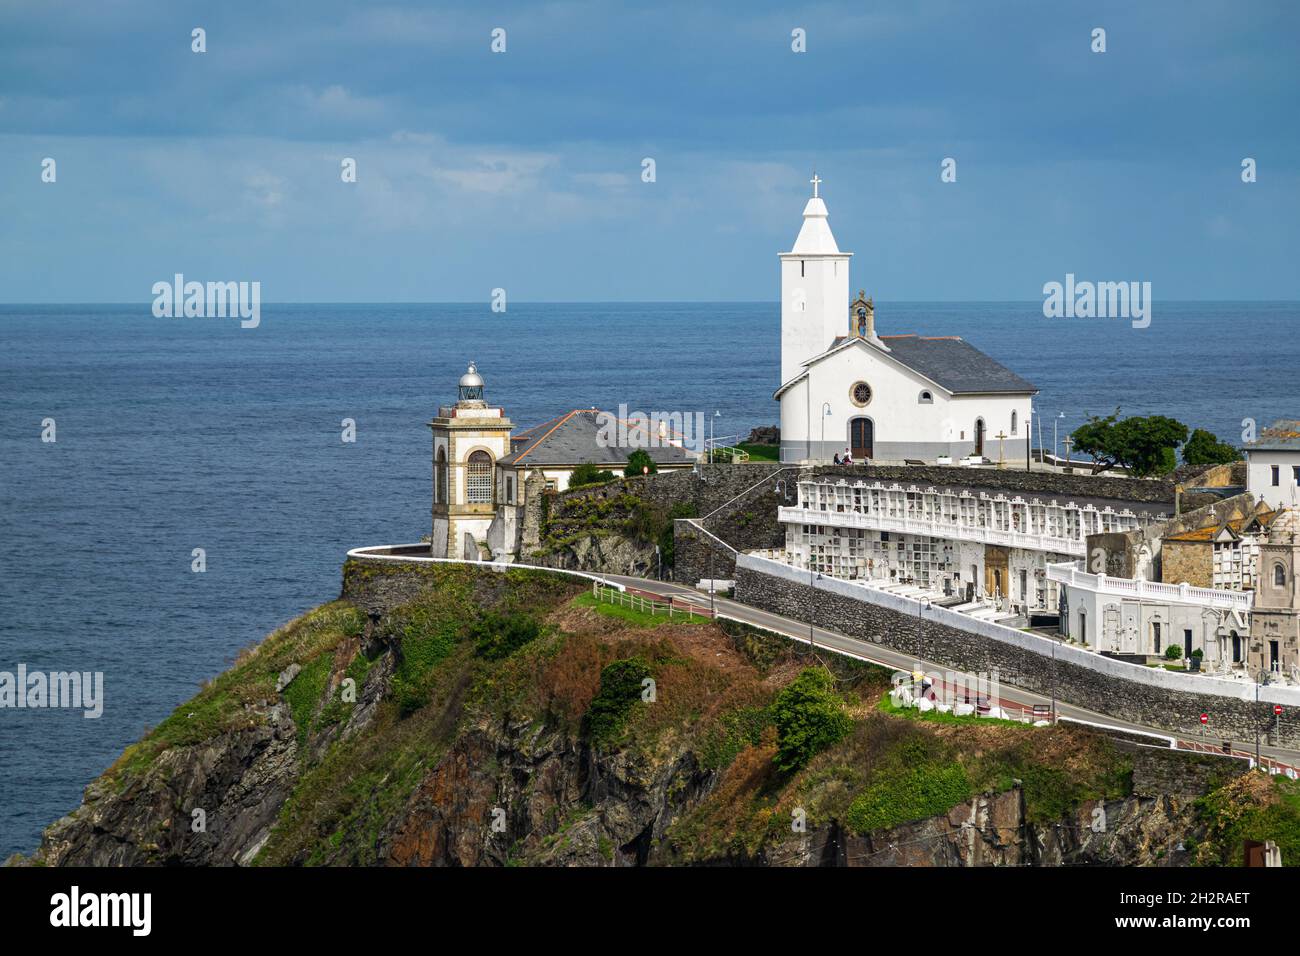 Picturesque chapel with cemetery and a lighthouse overlooking Bay of Biscay in the village of Luarca, Asturias, Spain. Stock Photo